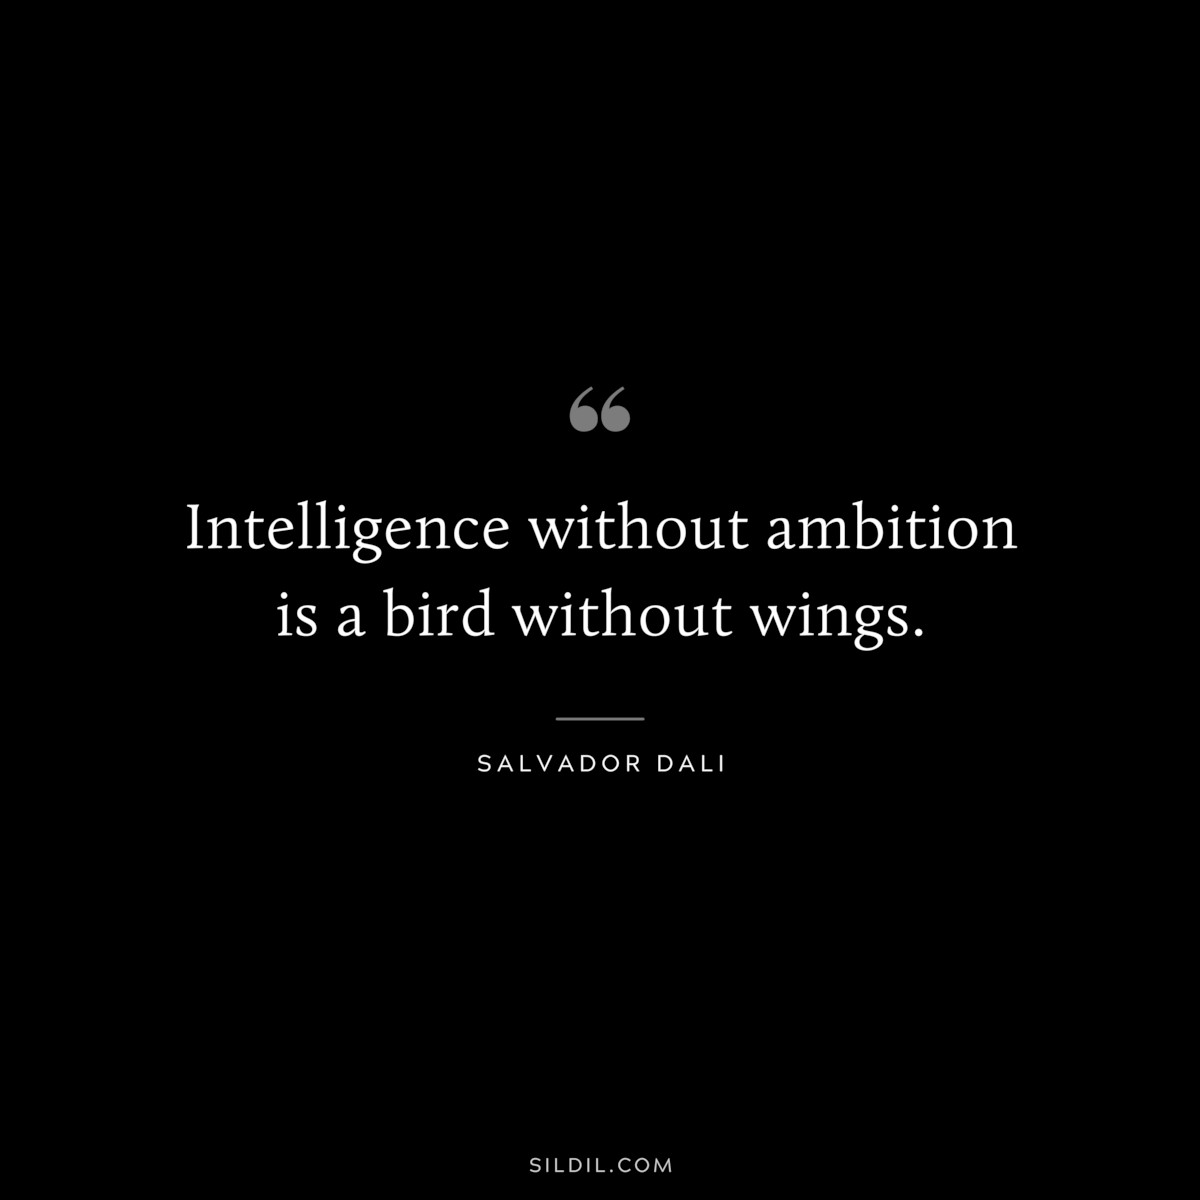 Intelligence without ambition is a bird without wings. ― Salvador Dali